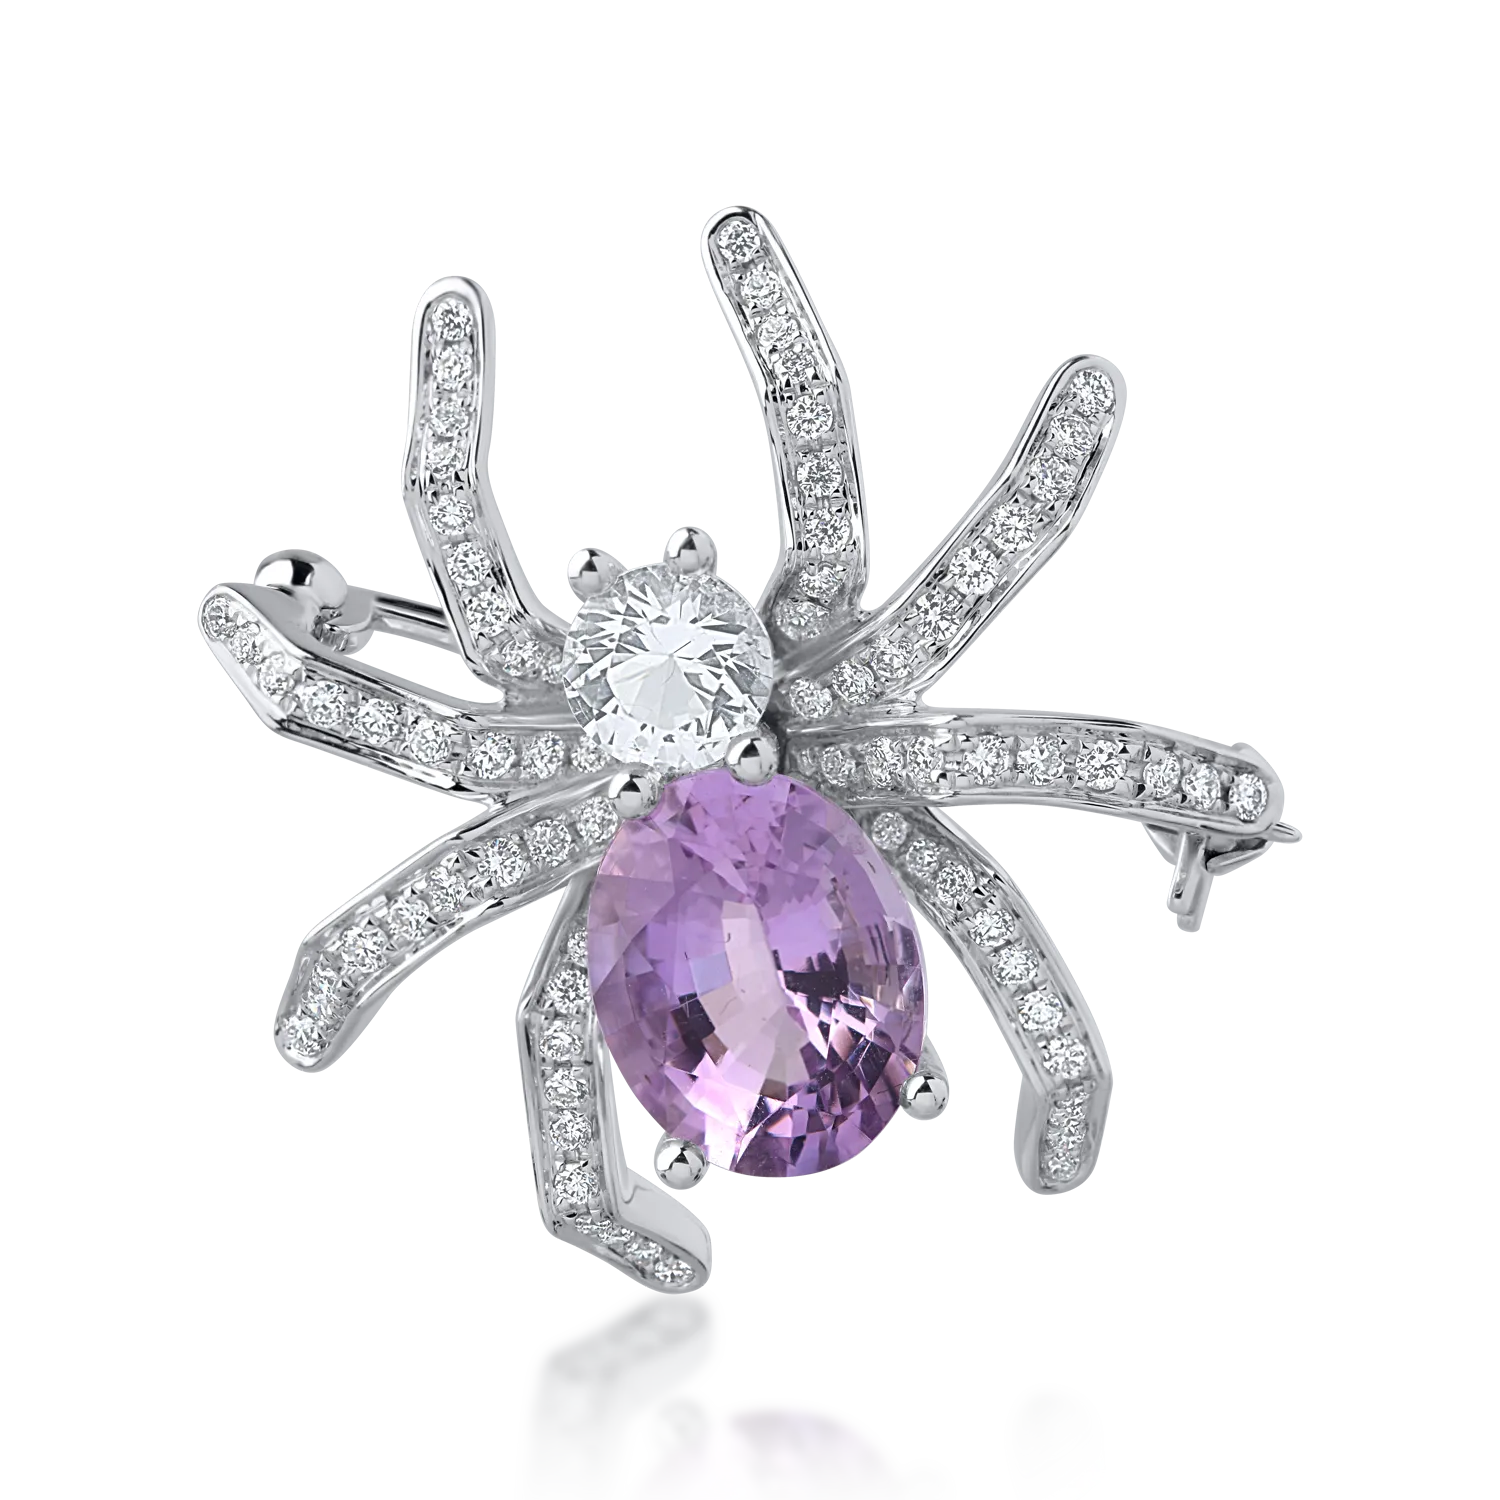 White gold brooch with 2.83ct amethysts and 0.42ct diamonds